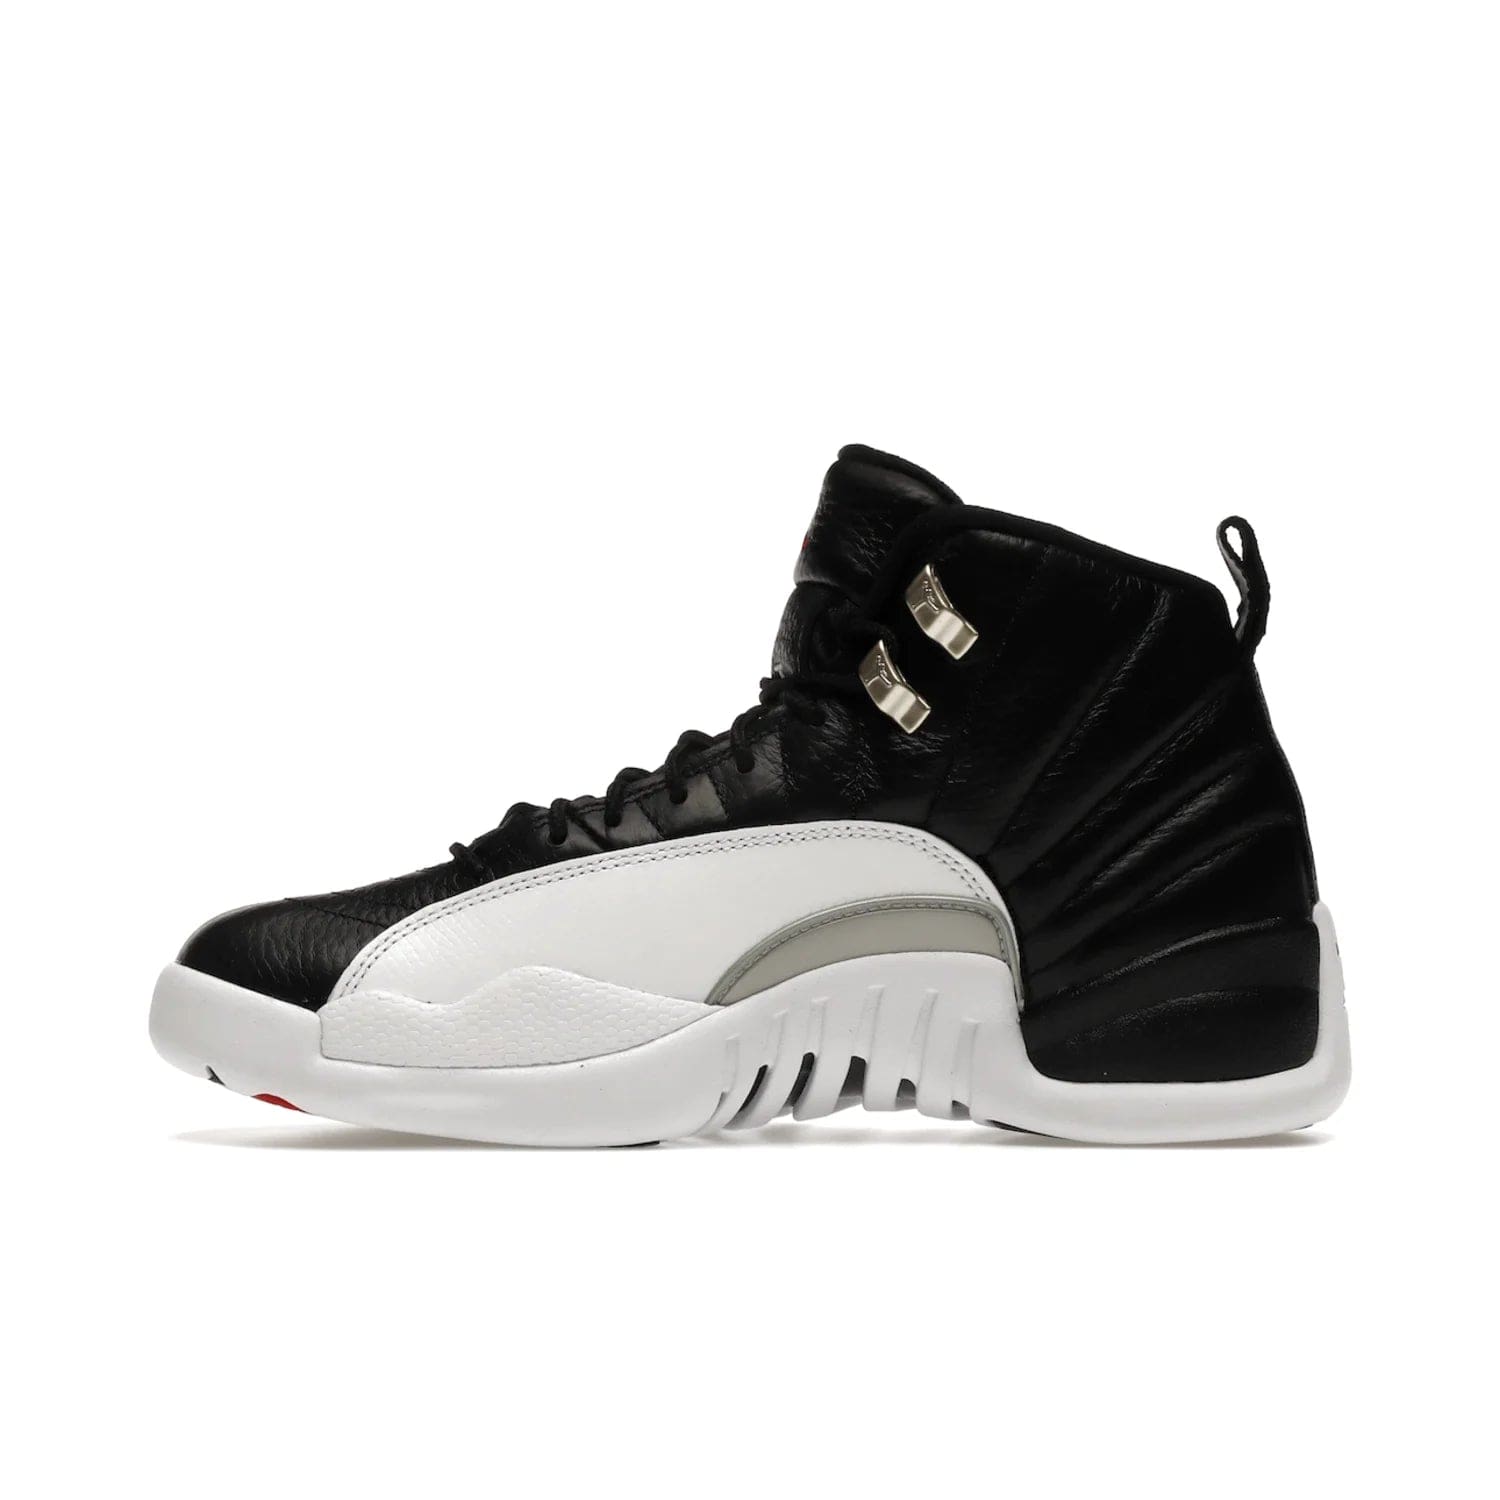 Jordan 12 Retro Playoffs (2022) - Image 19 - Only at www.BallersClubKickz.com - Retro Air Jordan 12 Playoffs. Celebrate 25 years with MJ's iconic shoe. Black tumbled leather upper, white sole with carbon fiber detailing and Jumpman embroidery. Must-have for any Jordan shoe fan. Releases March 2022.